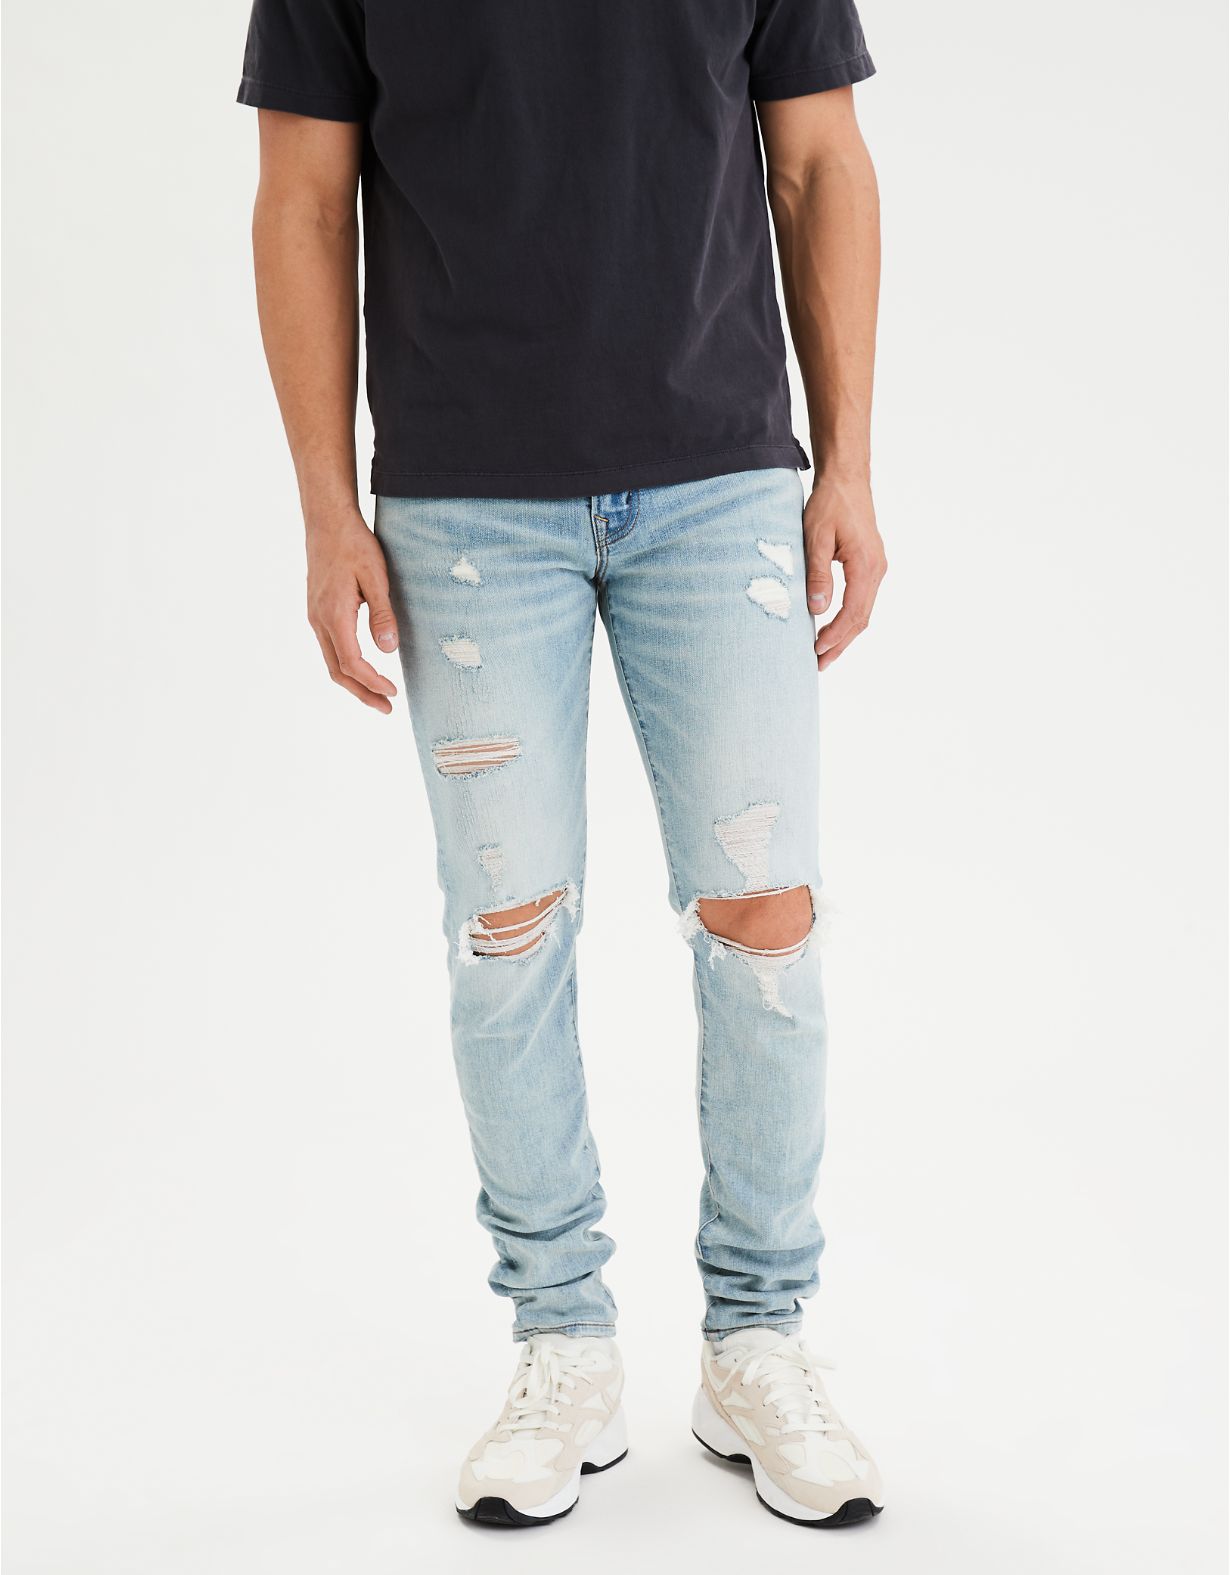 AE AirFlex+ Ripped Stacked Skinny Jean